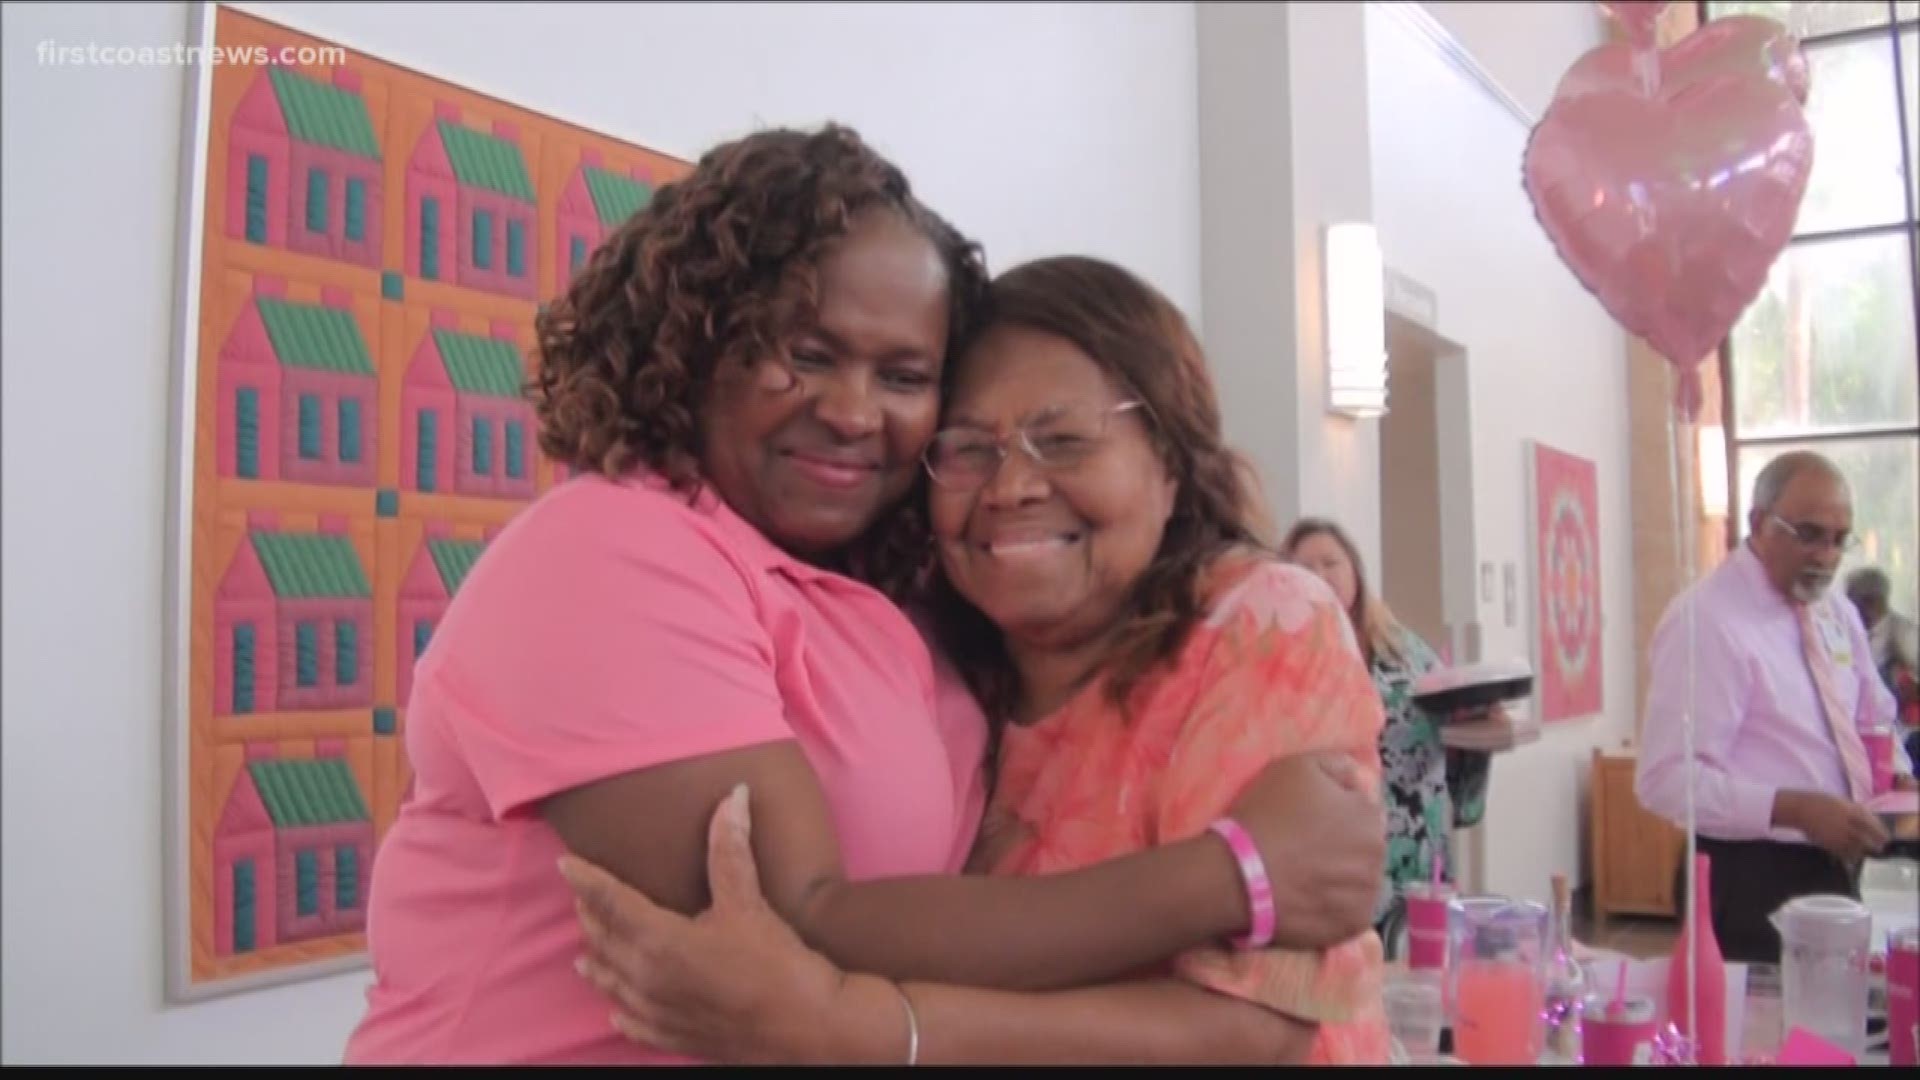 A local mom and daughter are buddies. With Buddy Check 12, her mom caught her breast cancer early enough so that she didn't need chemotherapy.